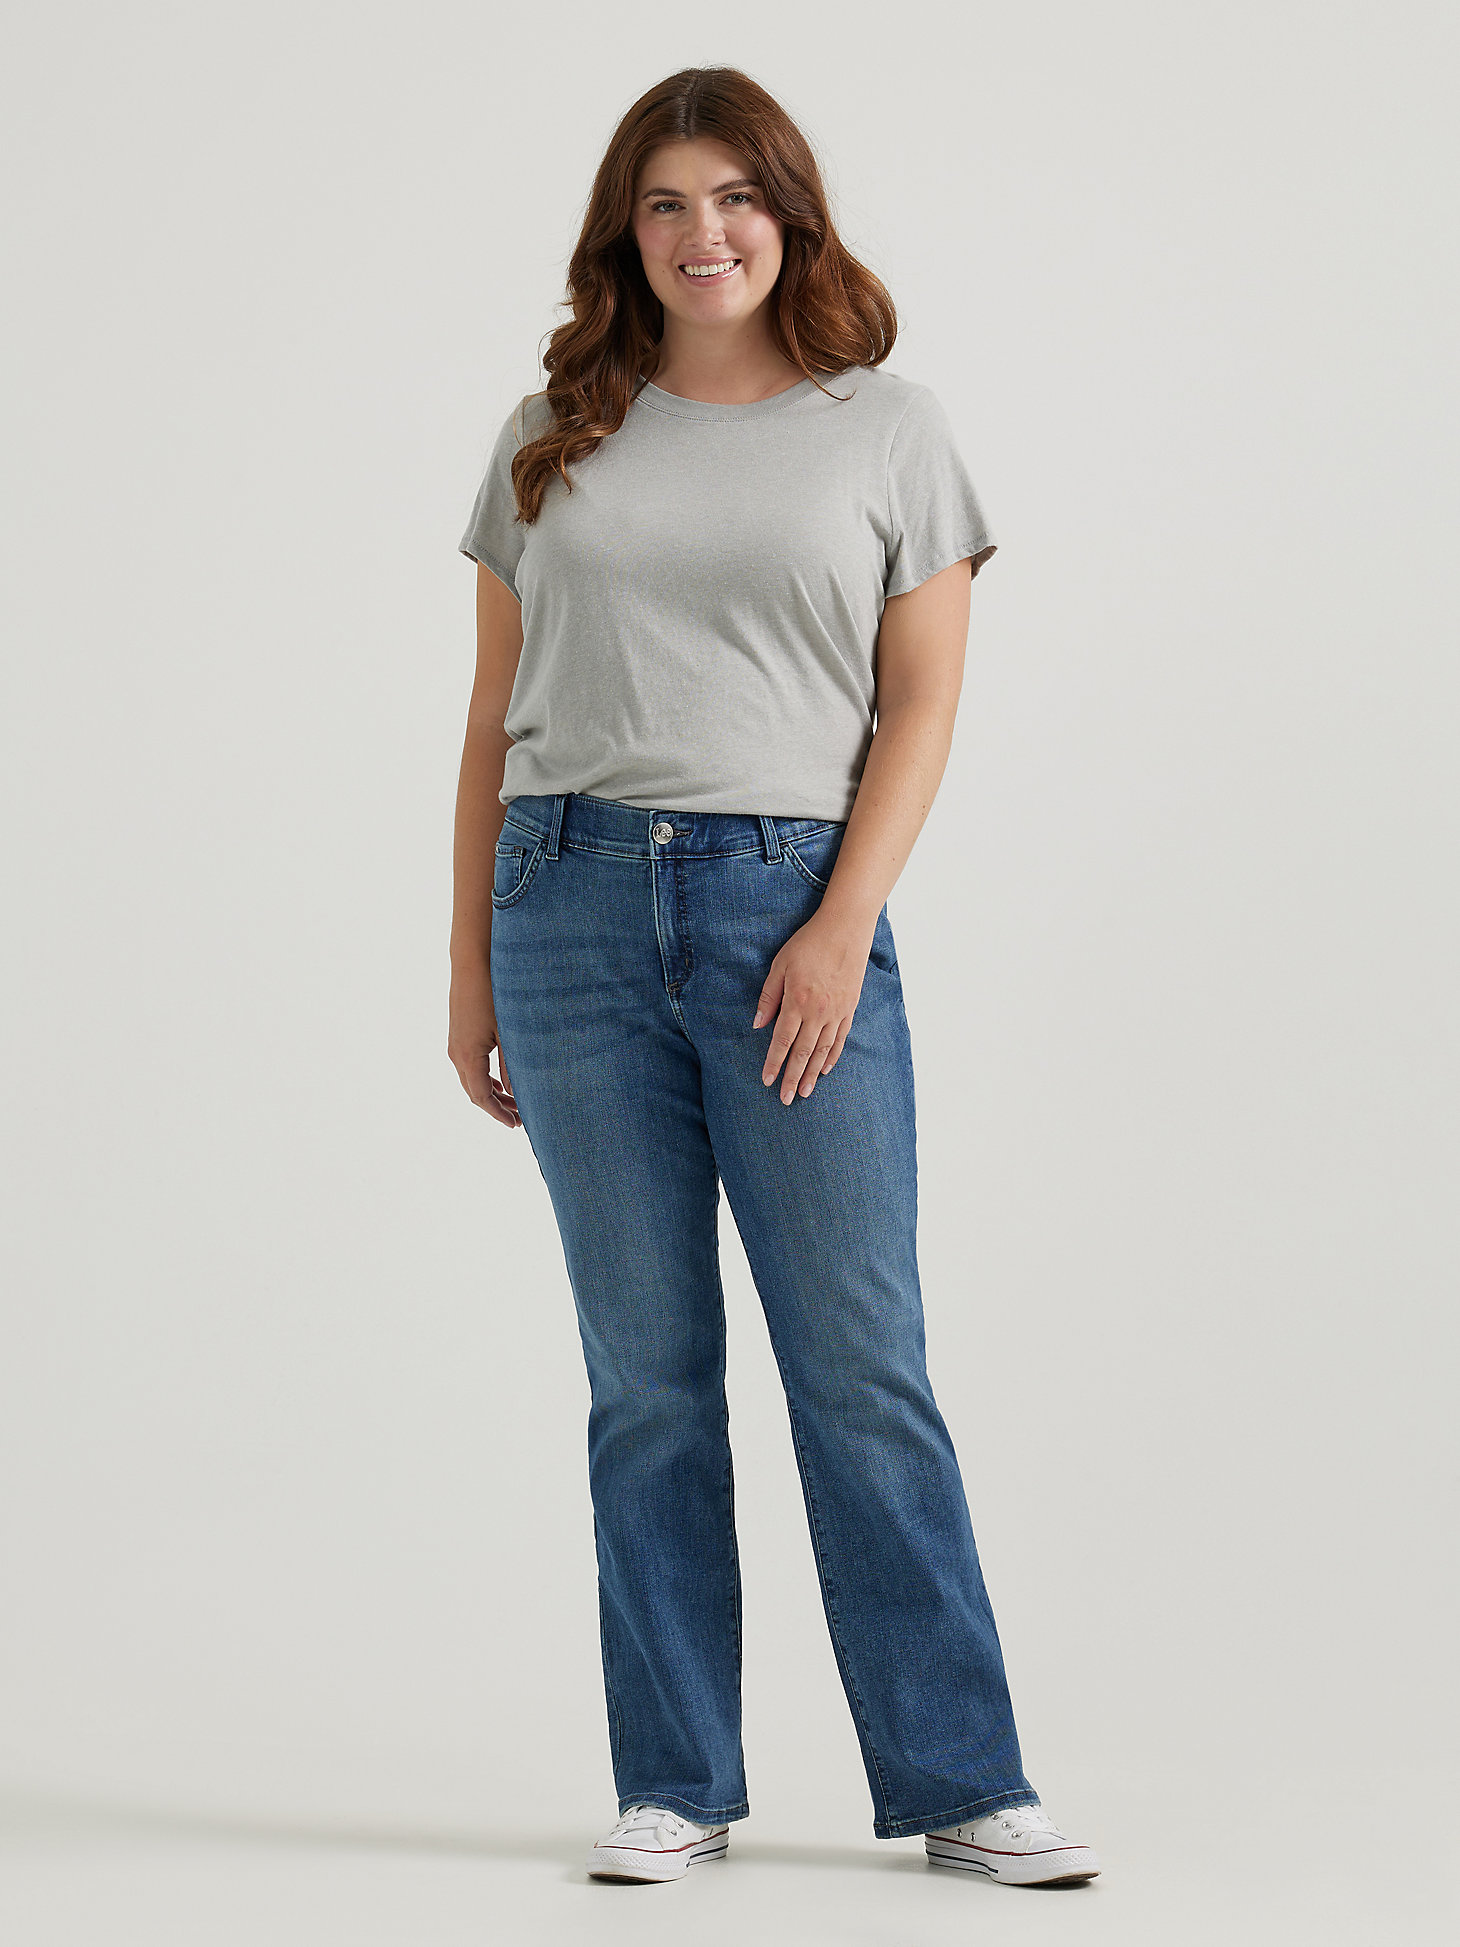 Women's Ultra Lux with Flex Motion Bootcut Jean (Plus) in Rayne alternative view 1